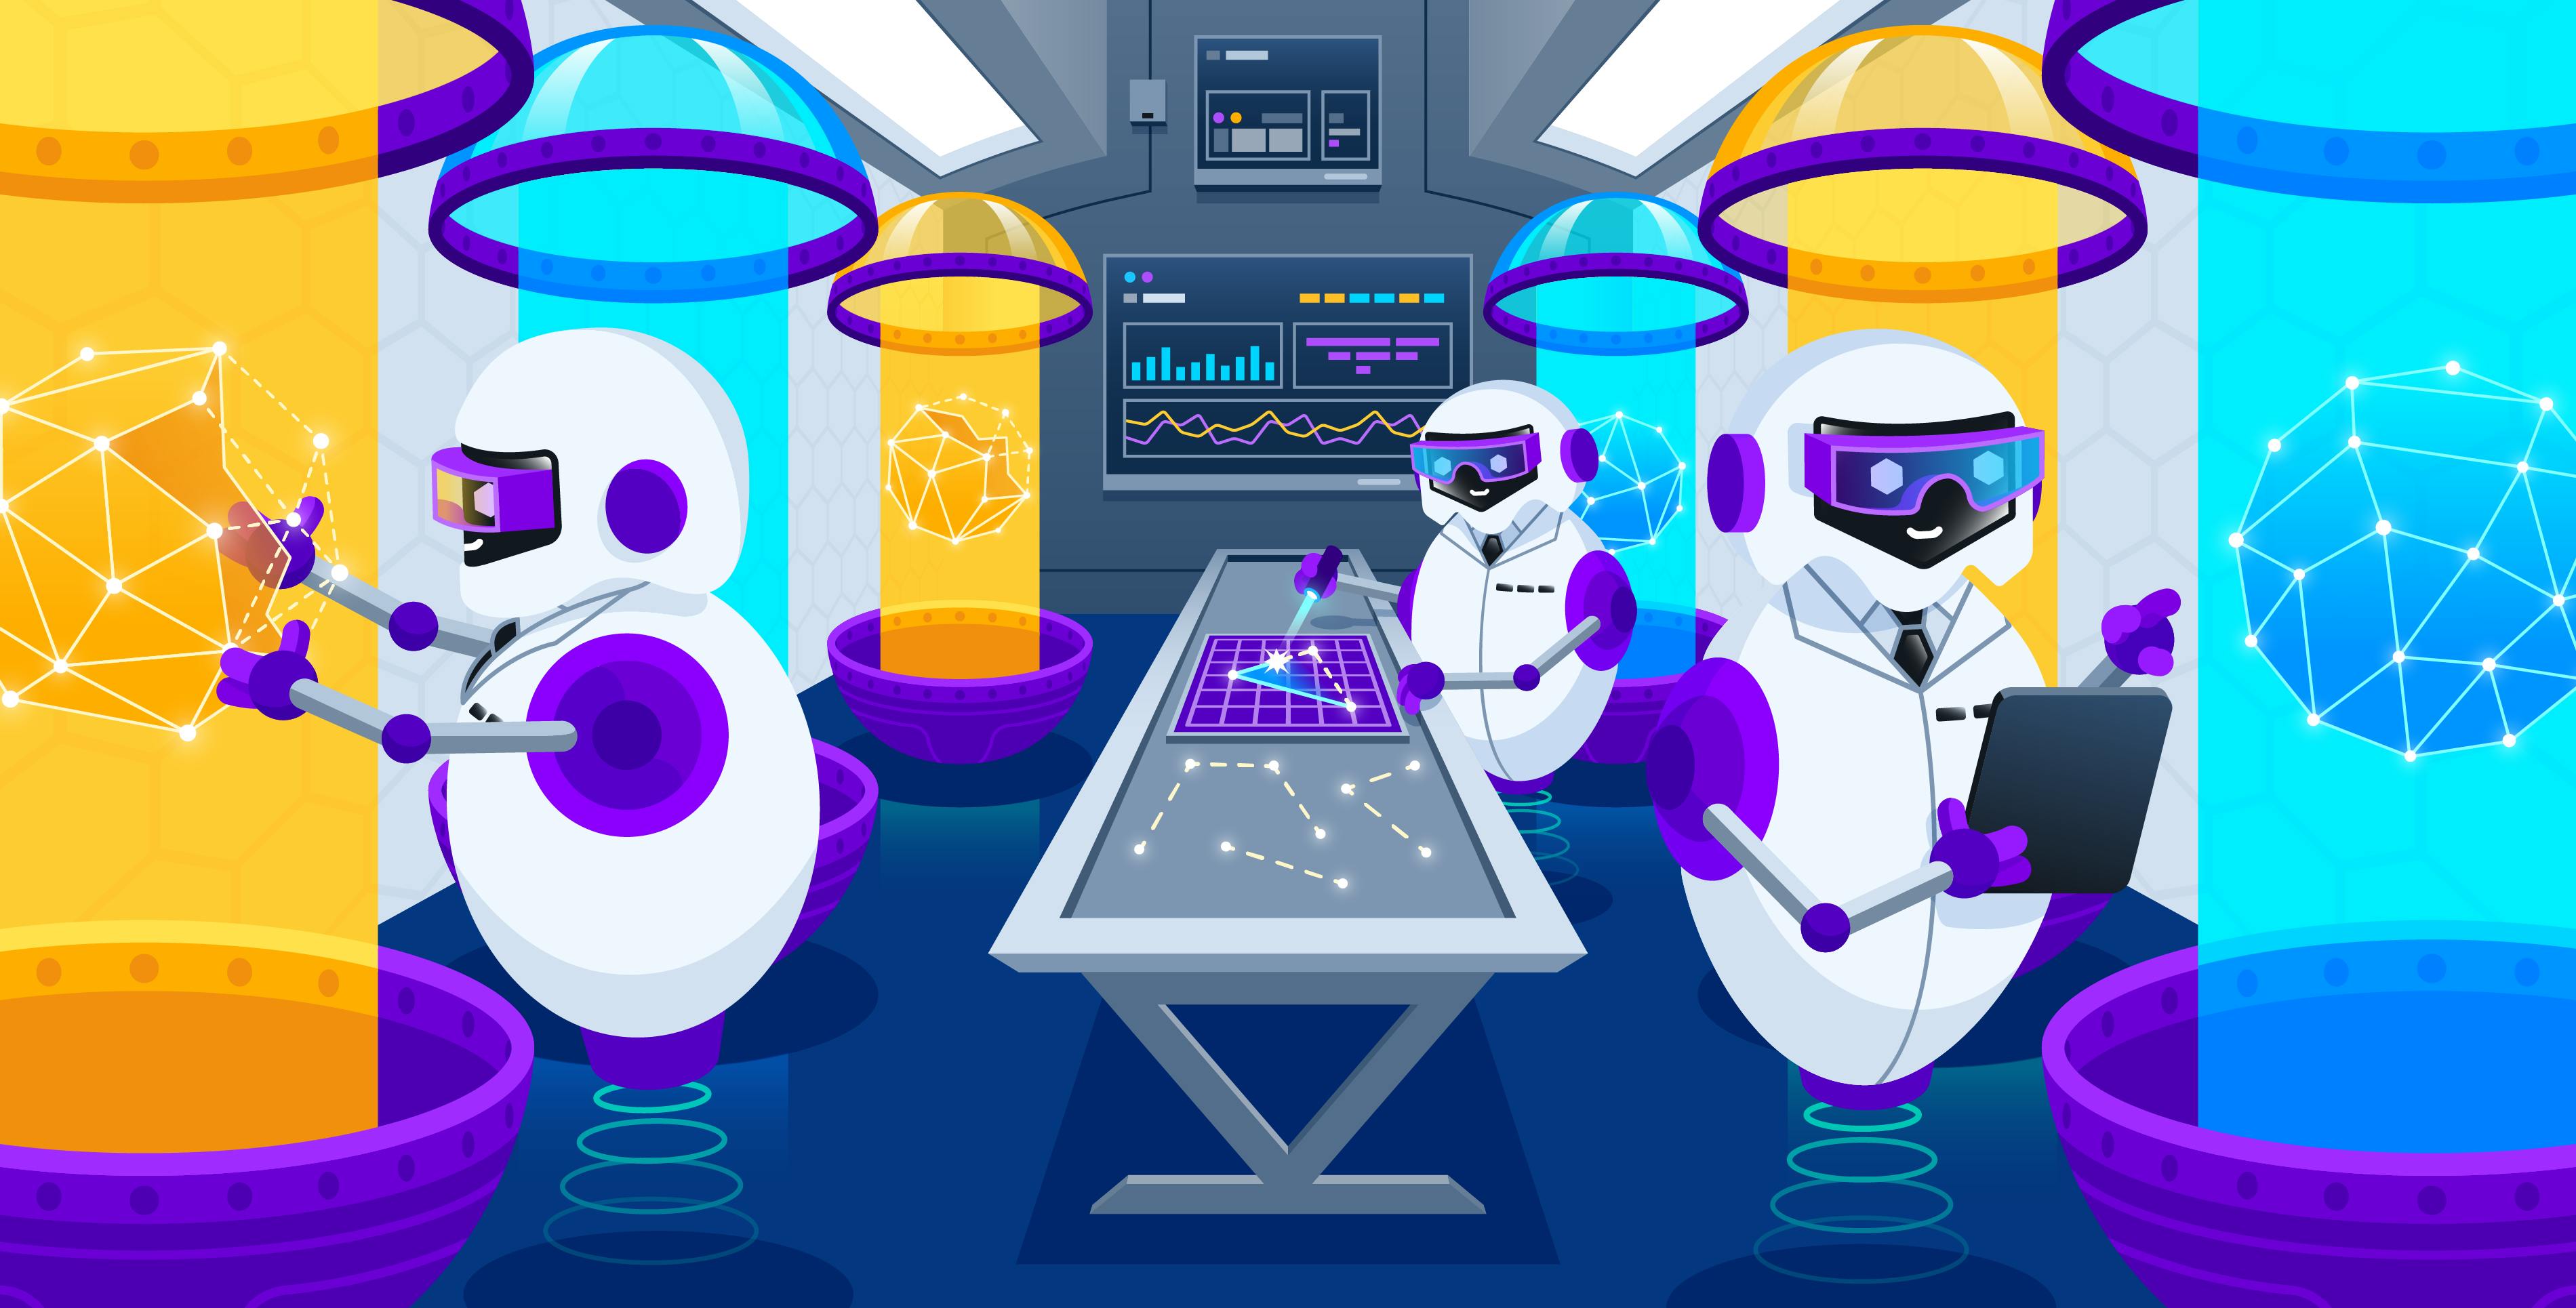 A digital illustration of three cheerful robots(purple and white), levitating in a lab-like environment(gray and white) and taking measurements of shapes suspended in large, alternating orange and blue tubes.